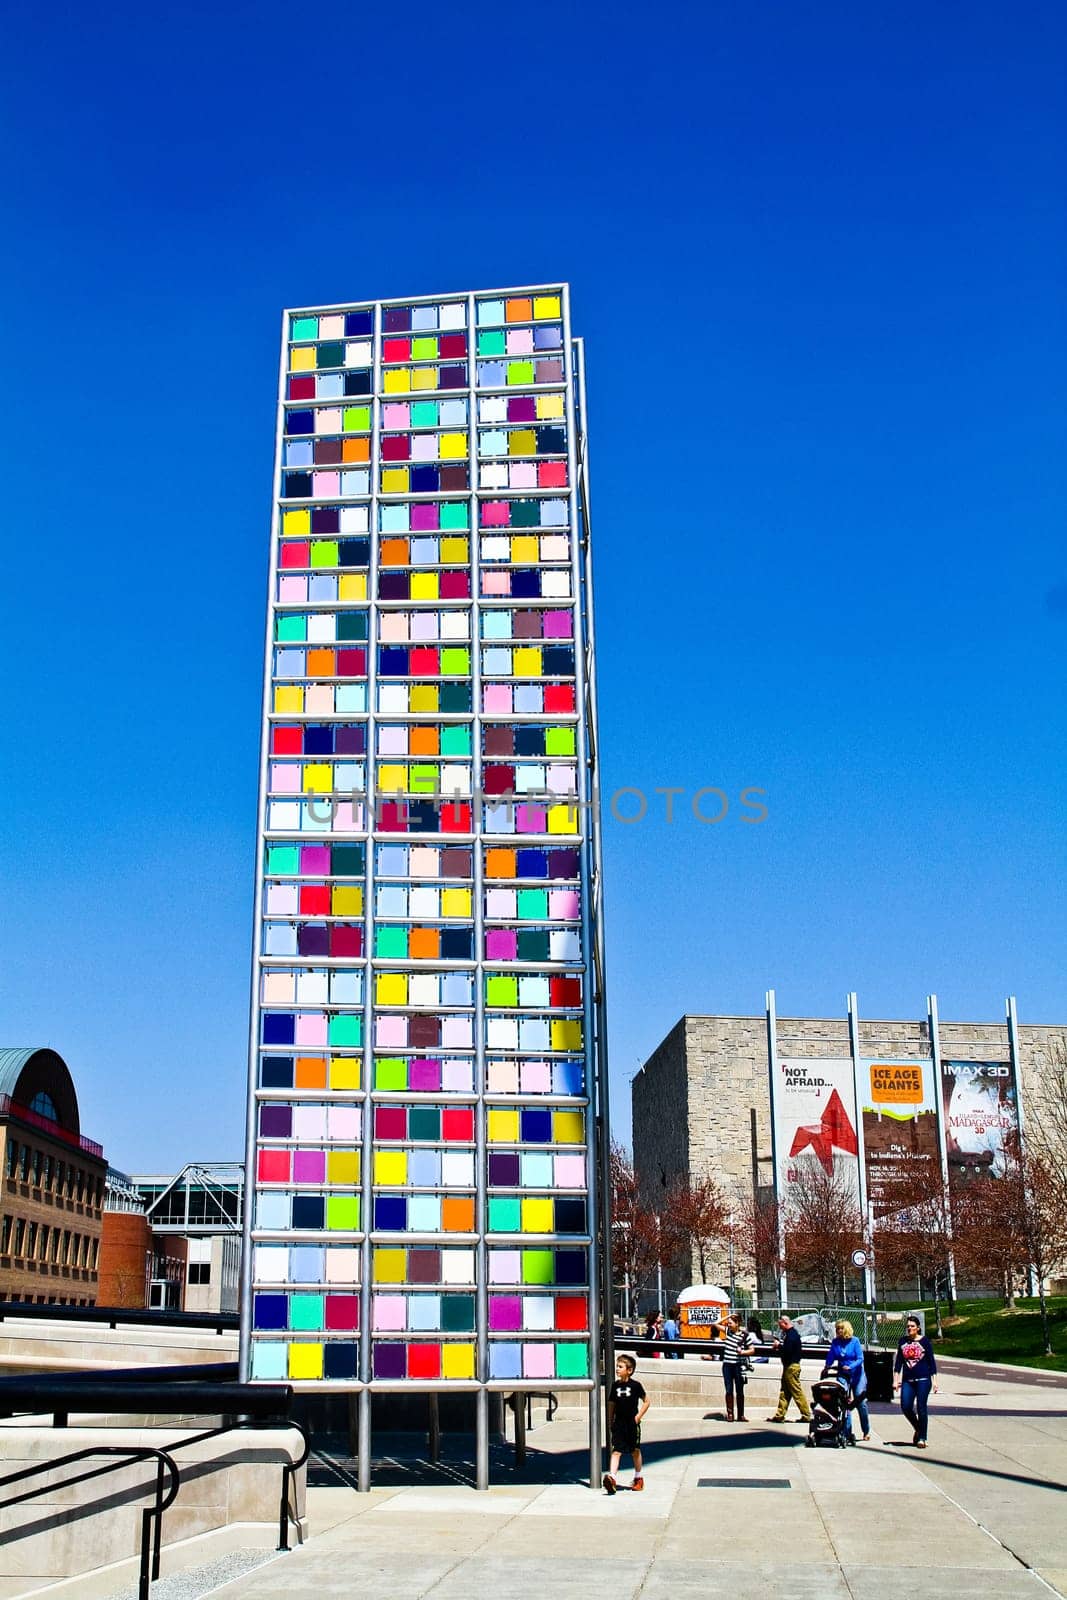 Vibrant Urban Sculpture in Sunny Indianapolis Plaza by njproductions